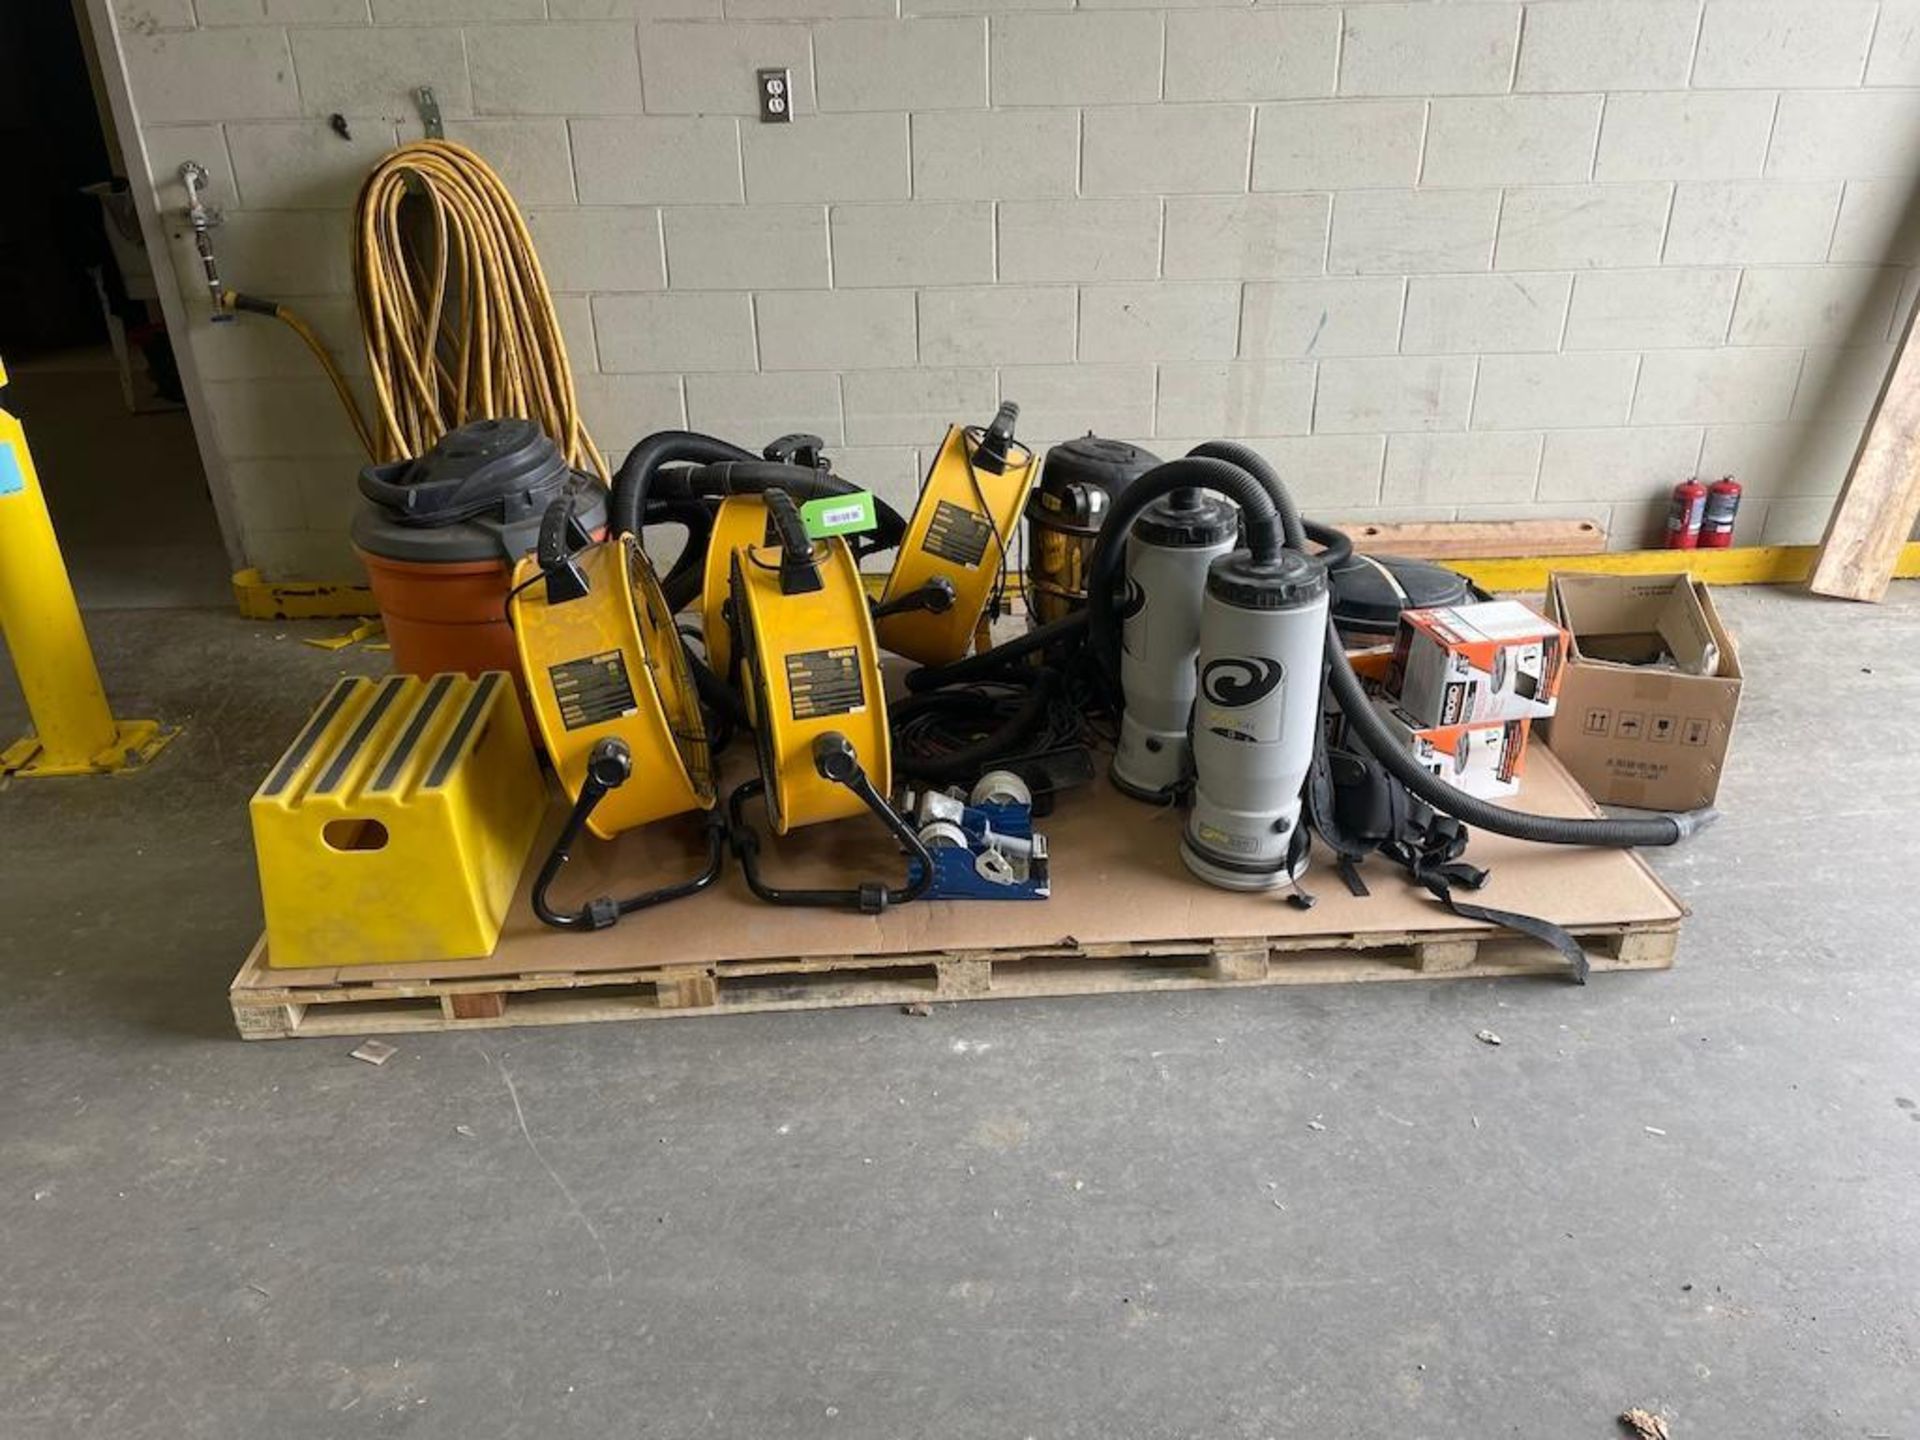 LOT: SKID W FANS, PROVAC, VACUUM CLEANERS [TROIS RIVIERES] *PLEASE NOTE, EXCLUSIVE RIGGING FEE OF $5